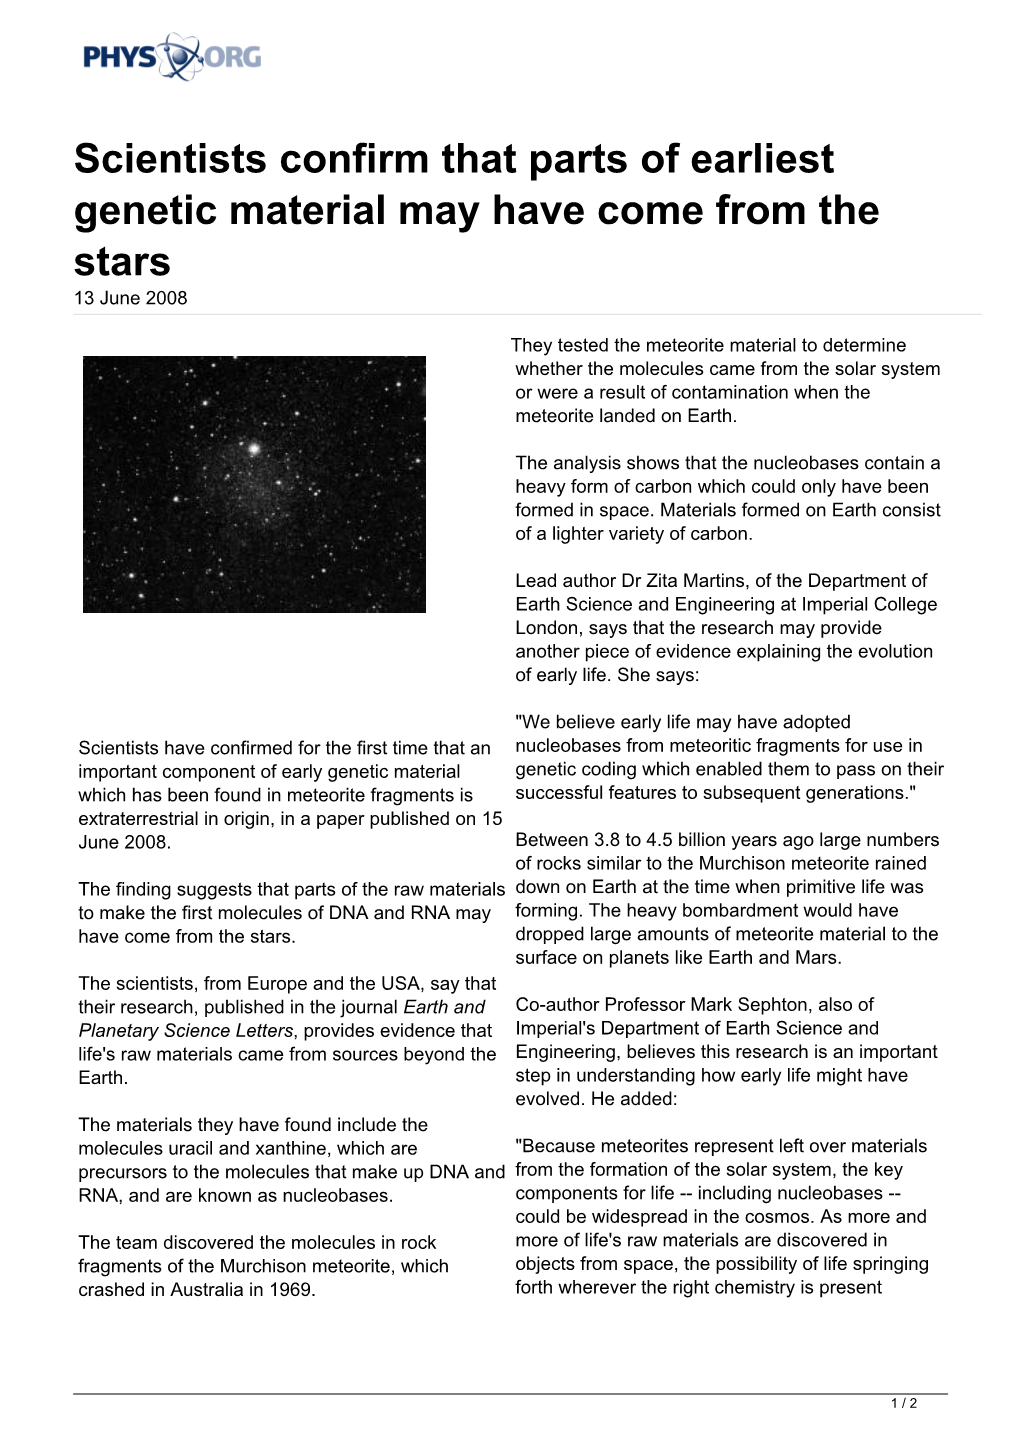 Scientists Confirm That Parts of Earliest Genetic Material May Have Come from the Stars 13 June 2008